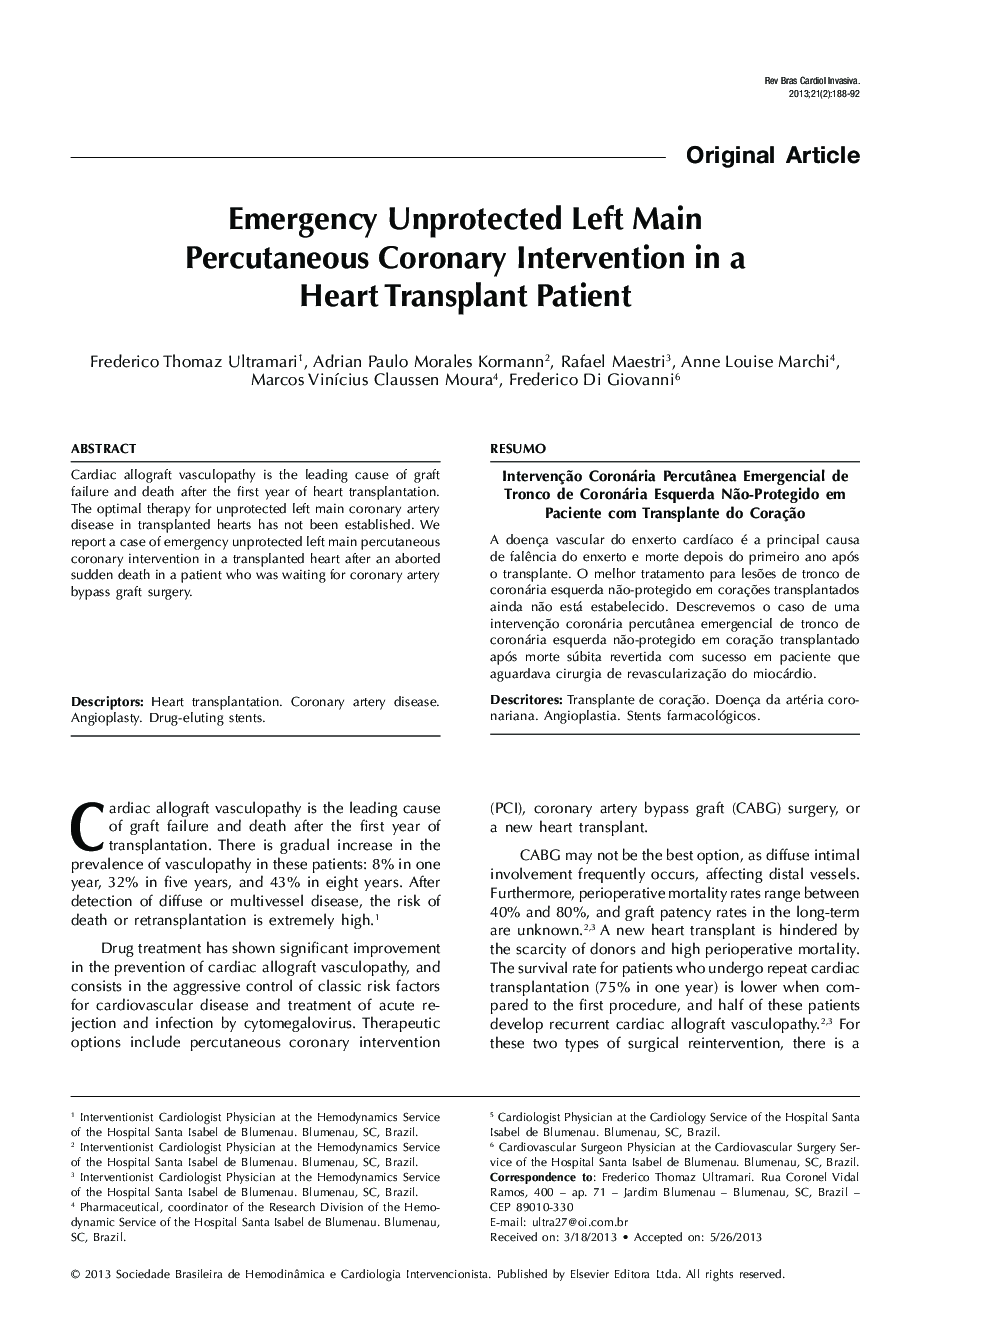 Emergency Unprotected Left Main Percutaneous Coronary Intervention in a Heart Transplant Patient